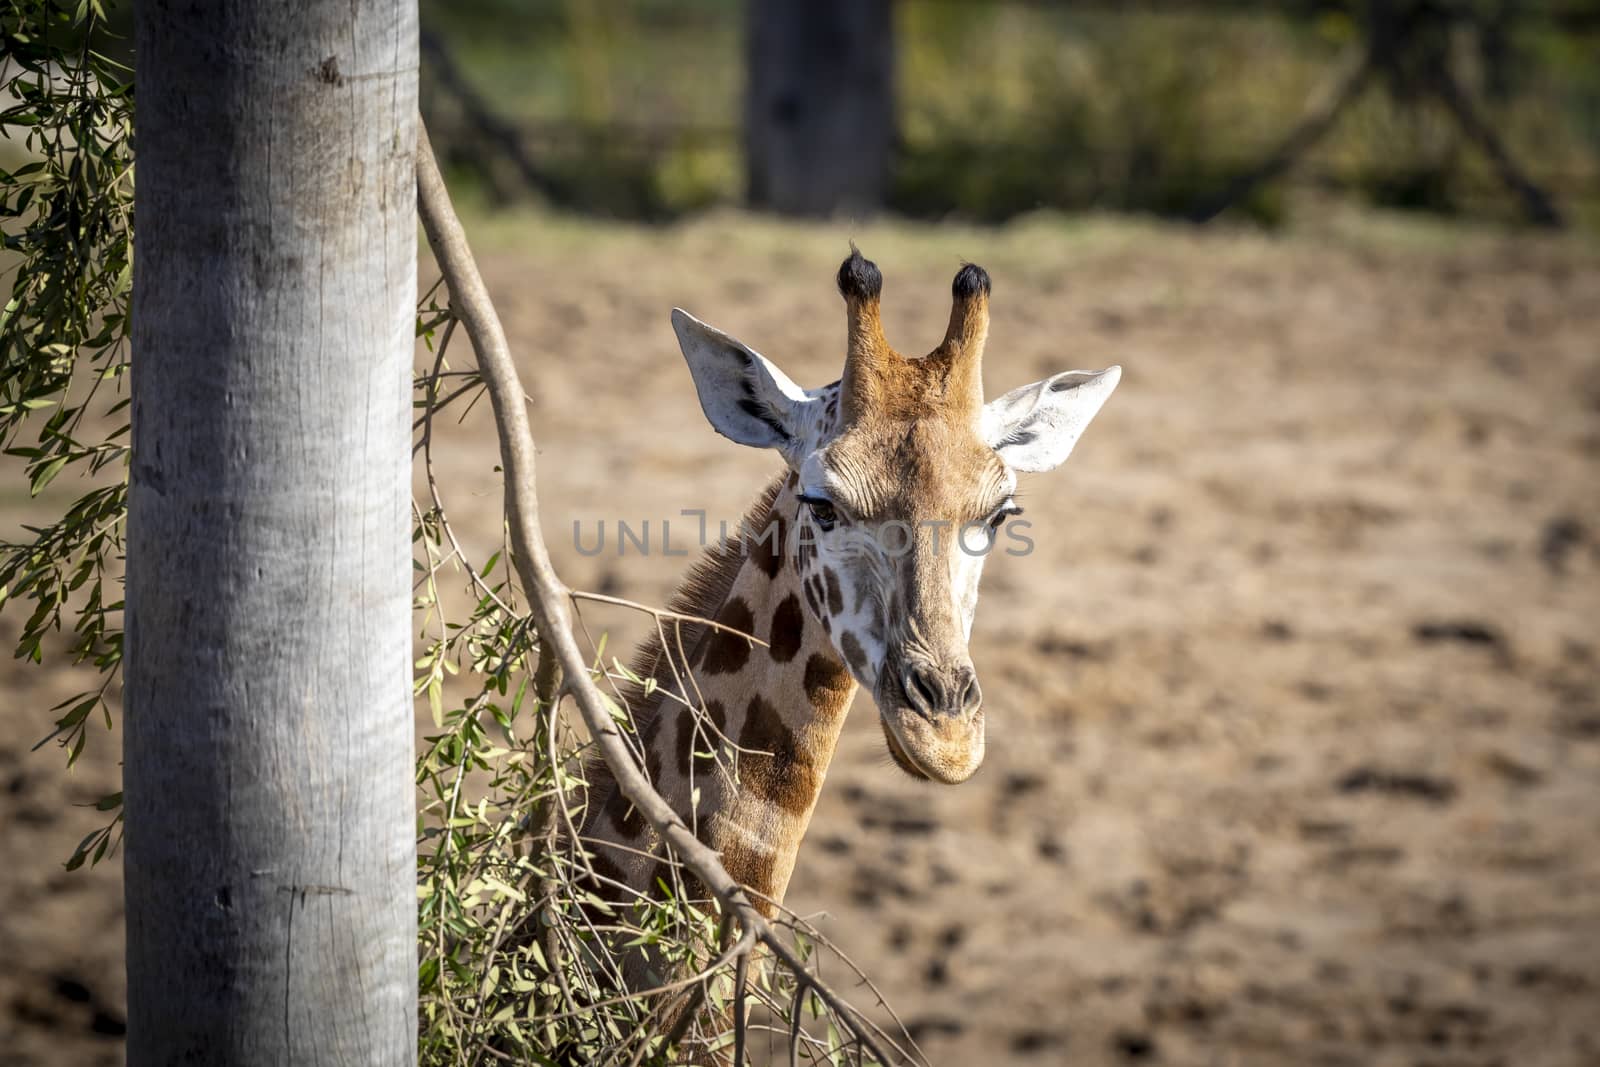 A young Giraffe eating leaves in a field in the sunshine by WittkePhotos